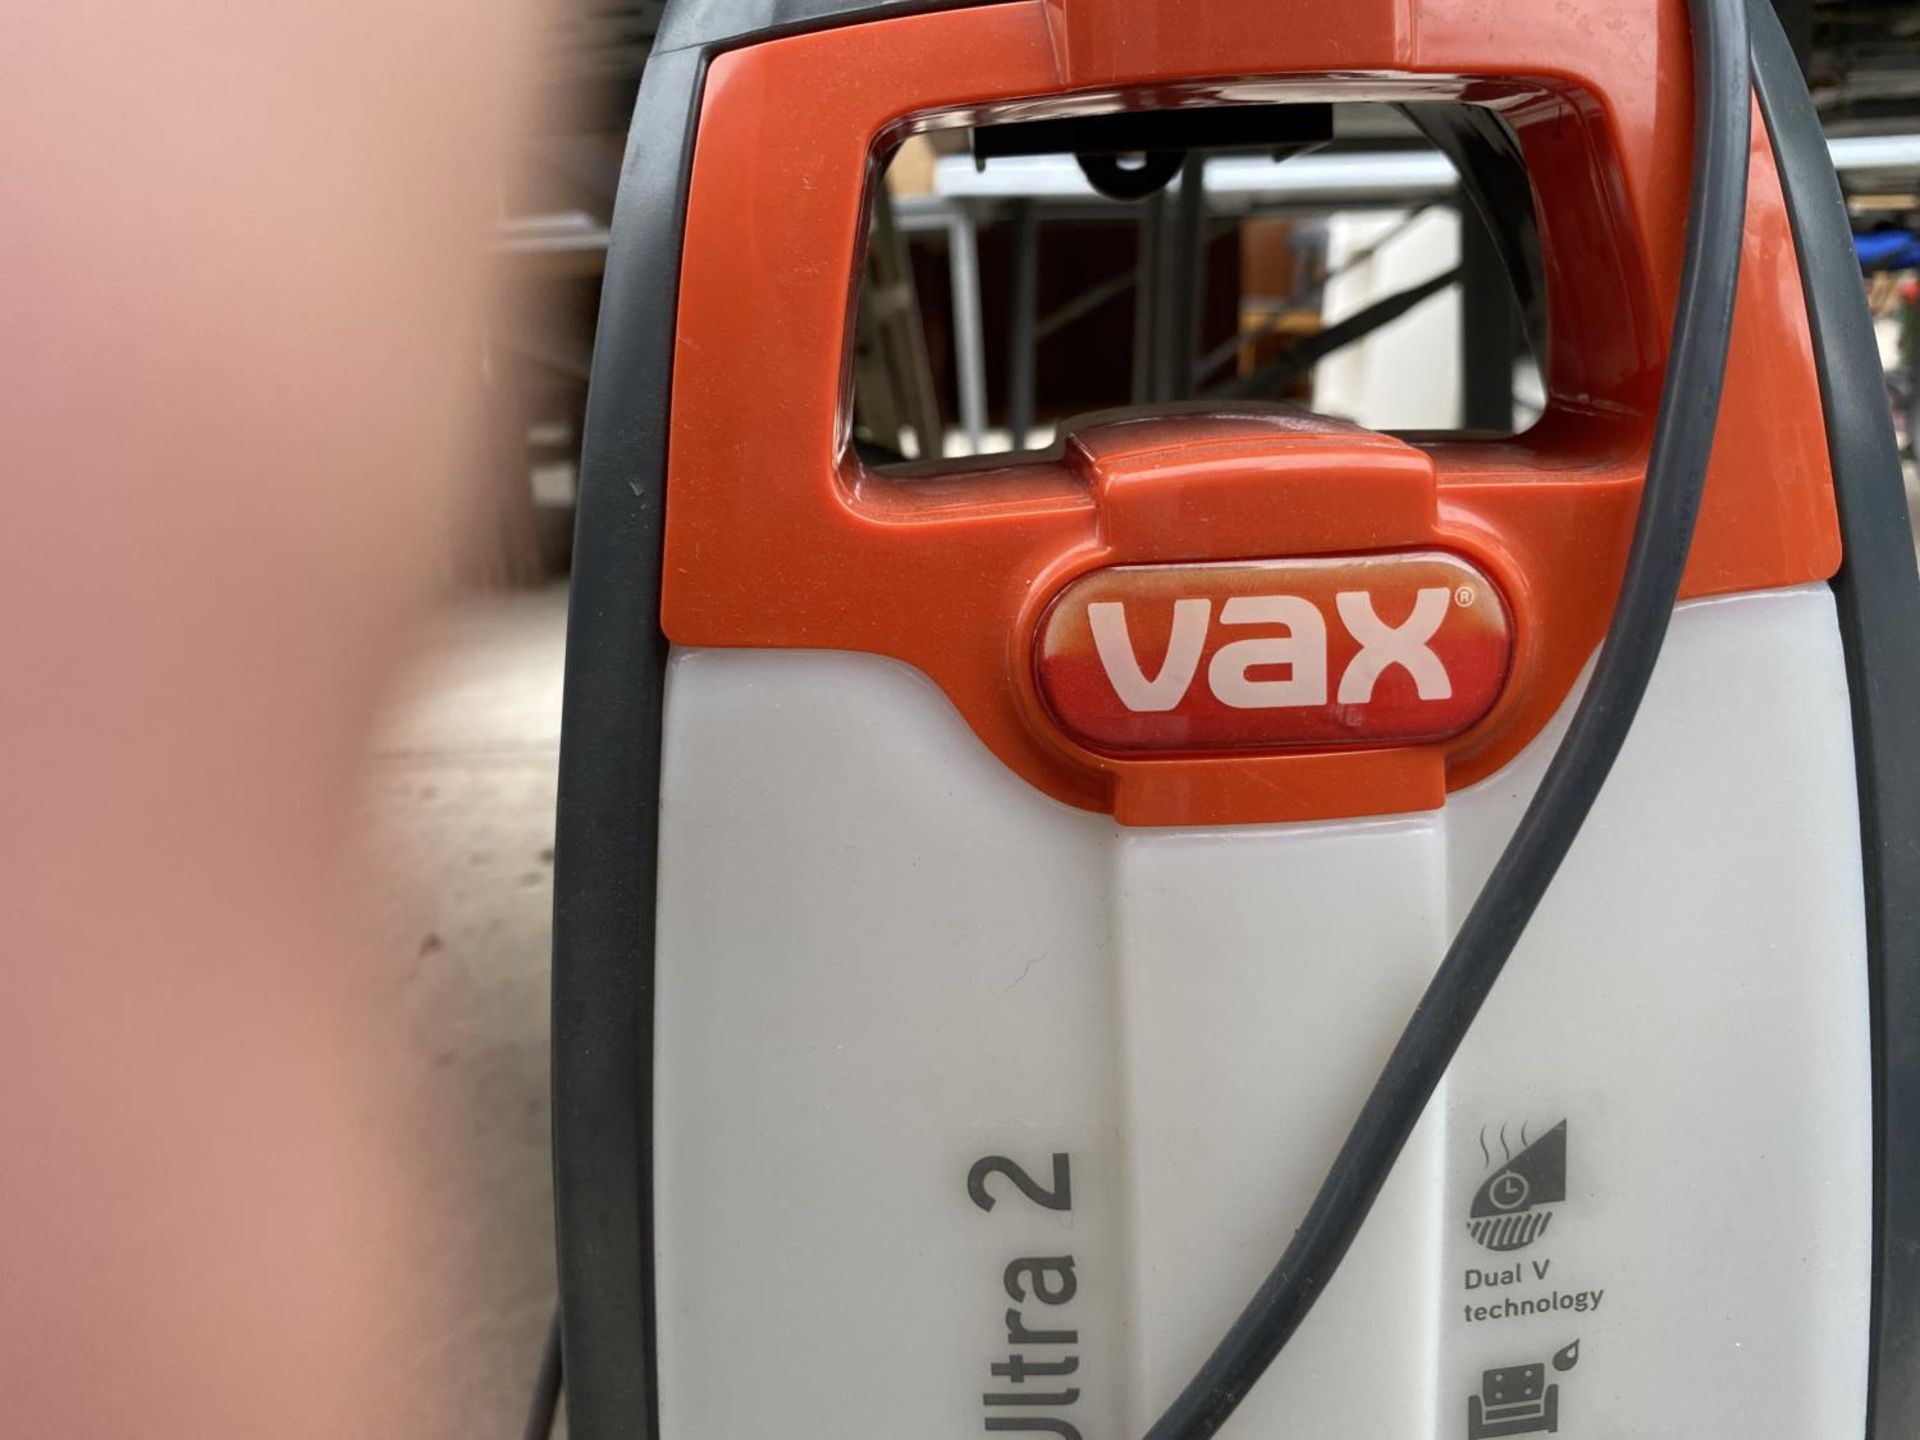 A VAX VACUUM CLEANER BELIEVED IN WORKING ORDER BUT NO WARRANTY - Image 2 of 3